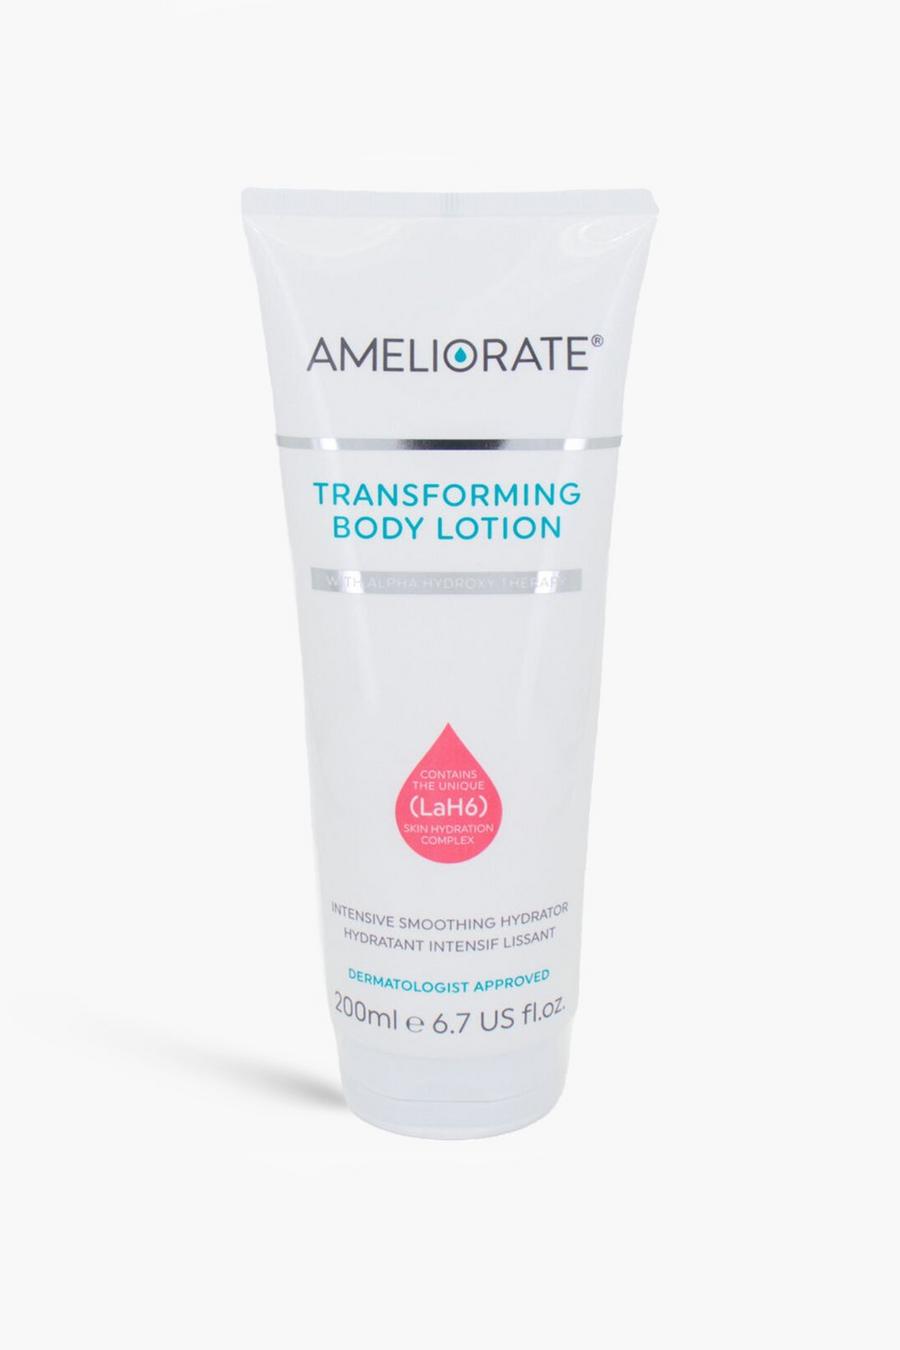 White AMELIORATE 200ML TRANSFORMING BODY LOTION ROSE